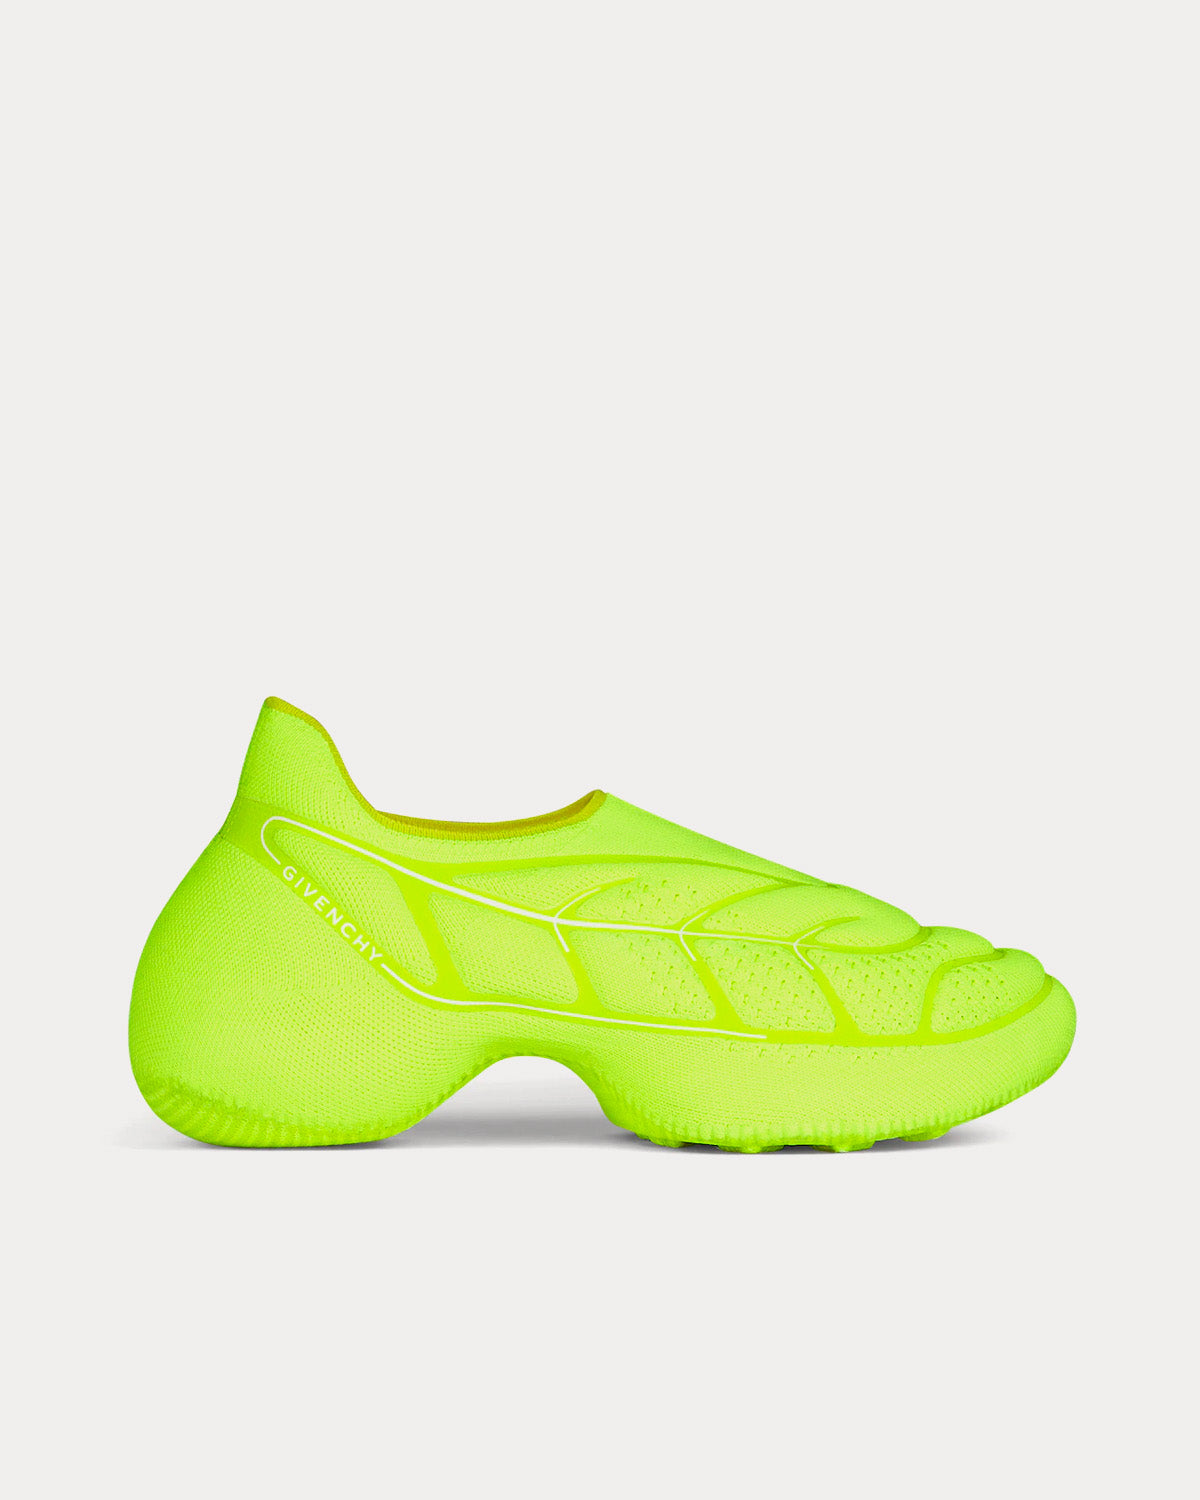 Givenchy TK-360+ Knit Fluo Yellow / White Slip On Sneakers - Sneak 